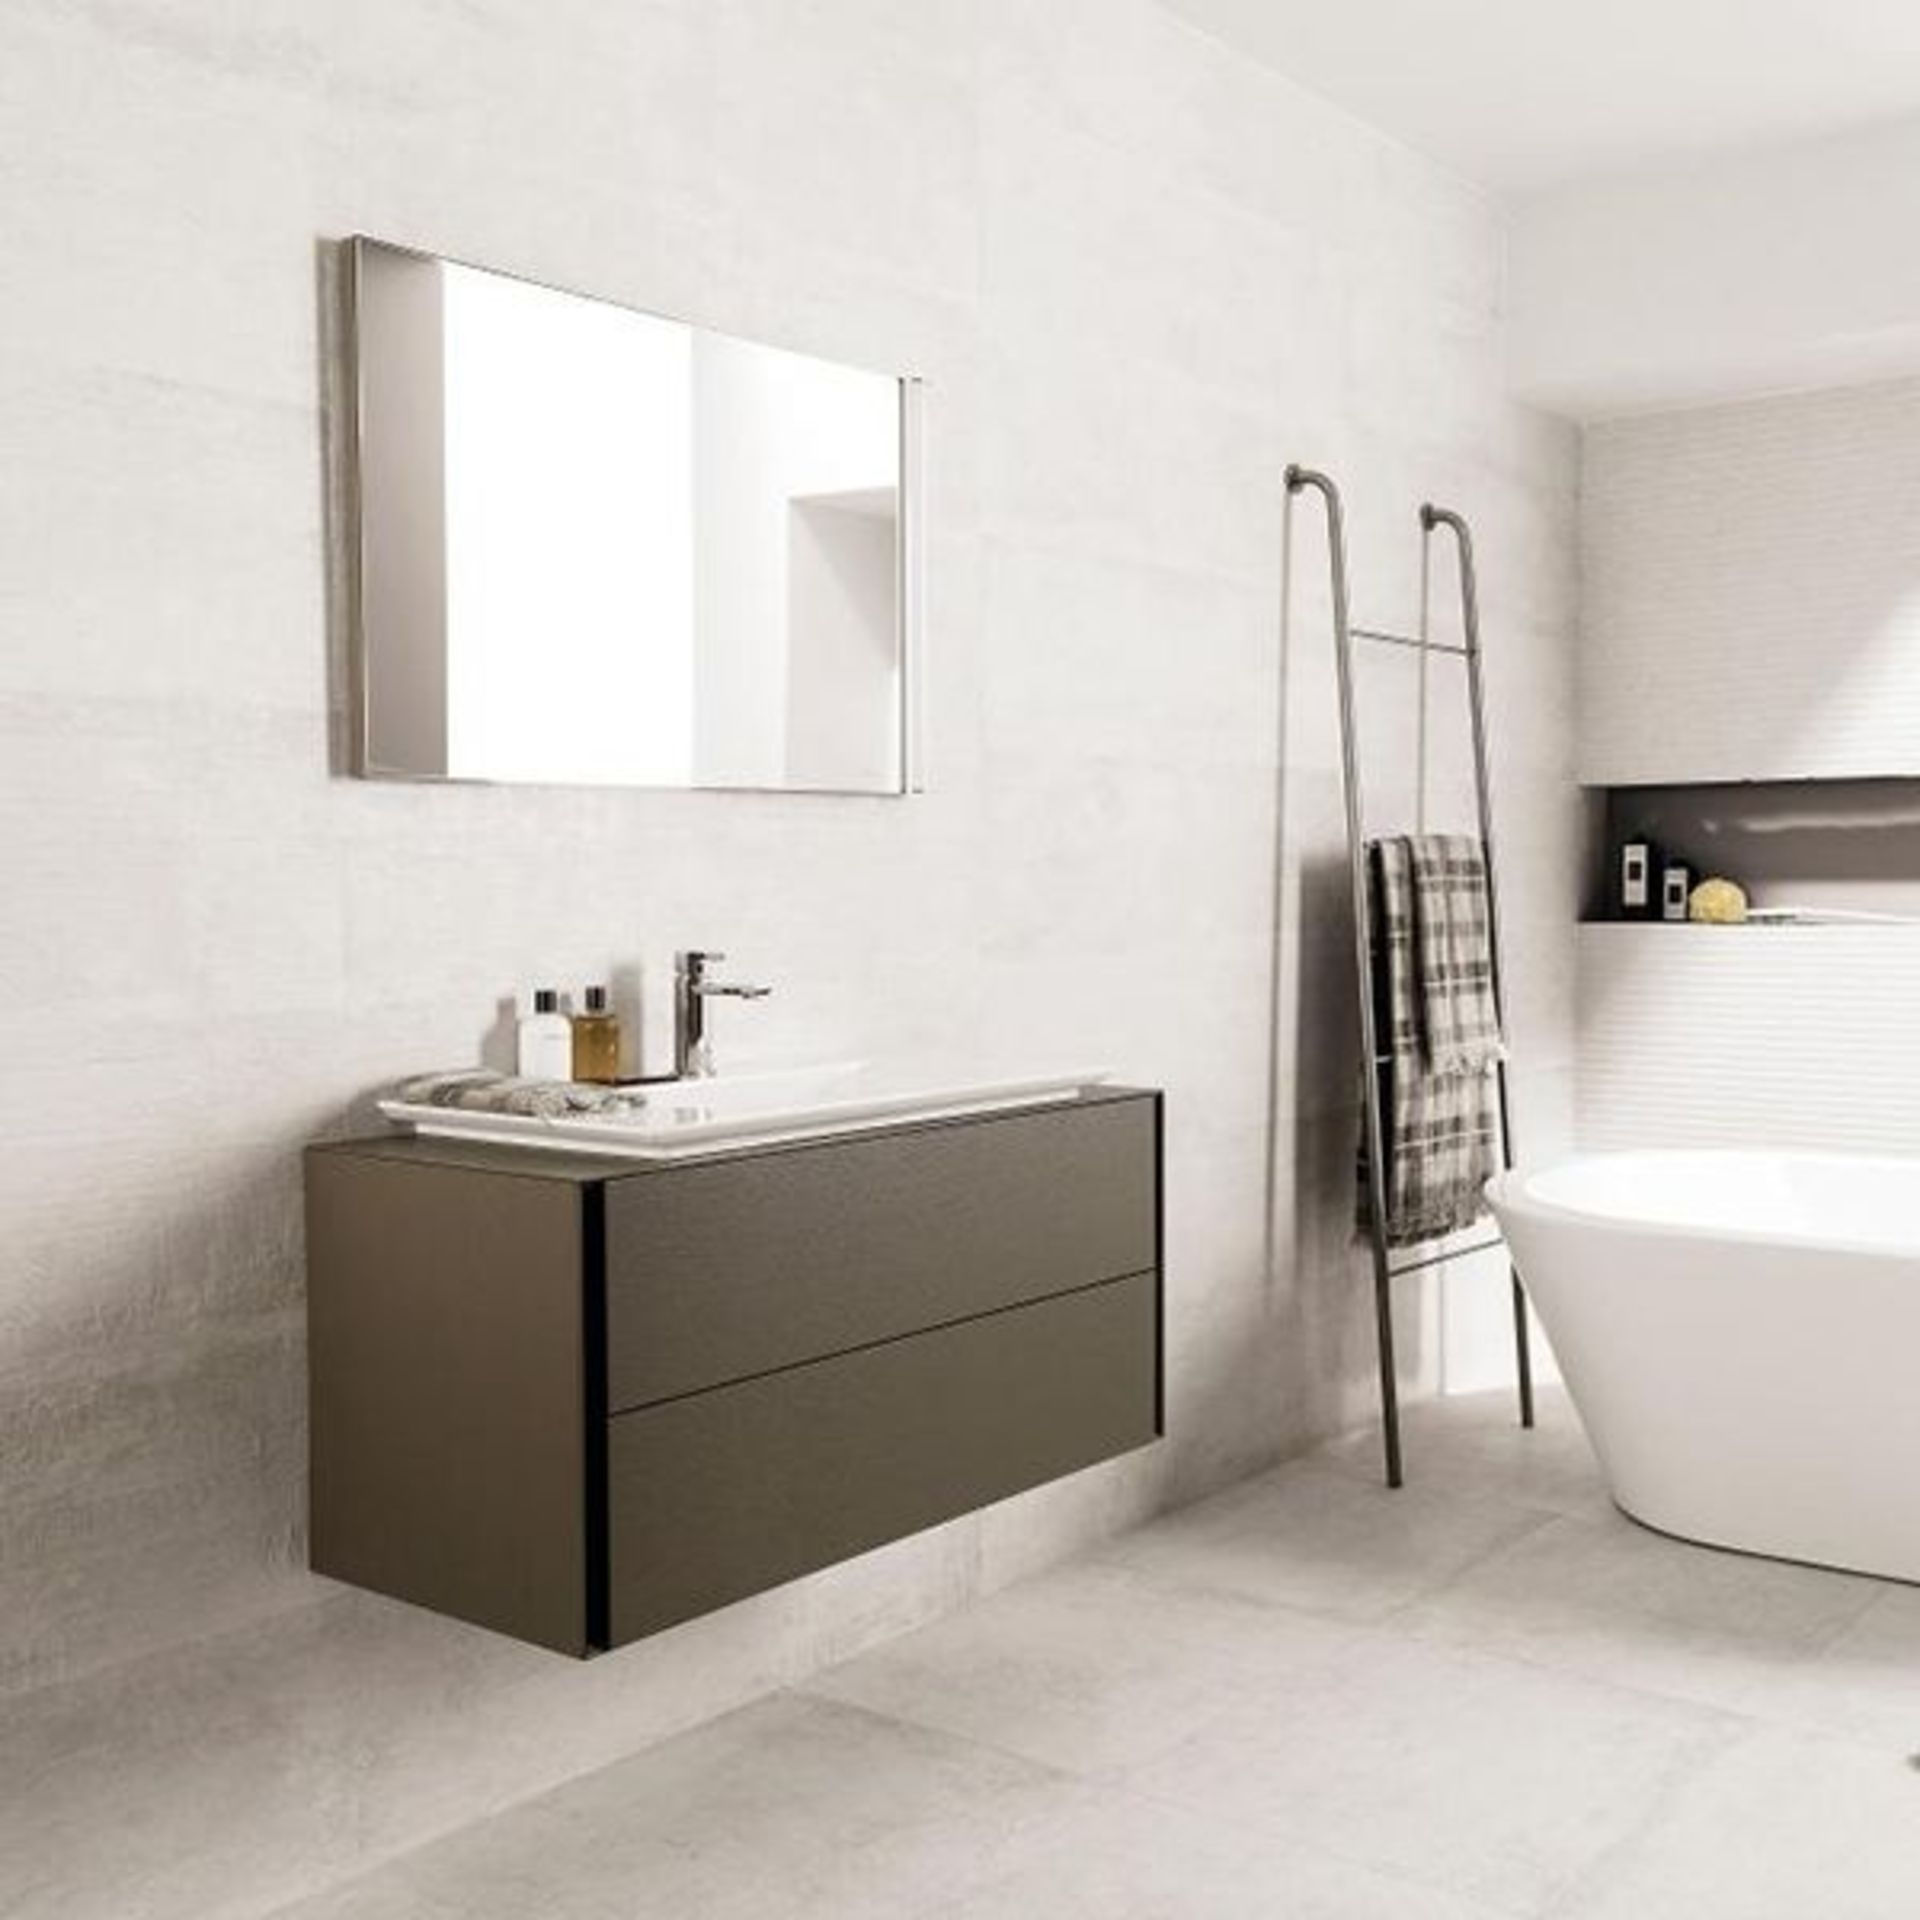 NEW 8.26M2 Square Meters of Porcelanosa Newport Beige Wall and Floor Tiles. 44.3x44.3cm per ti...